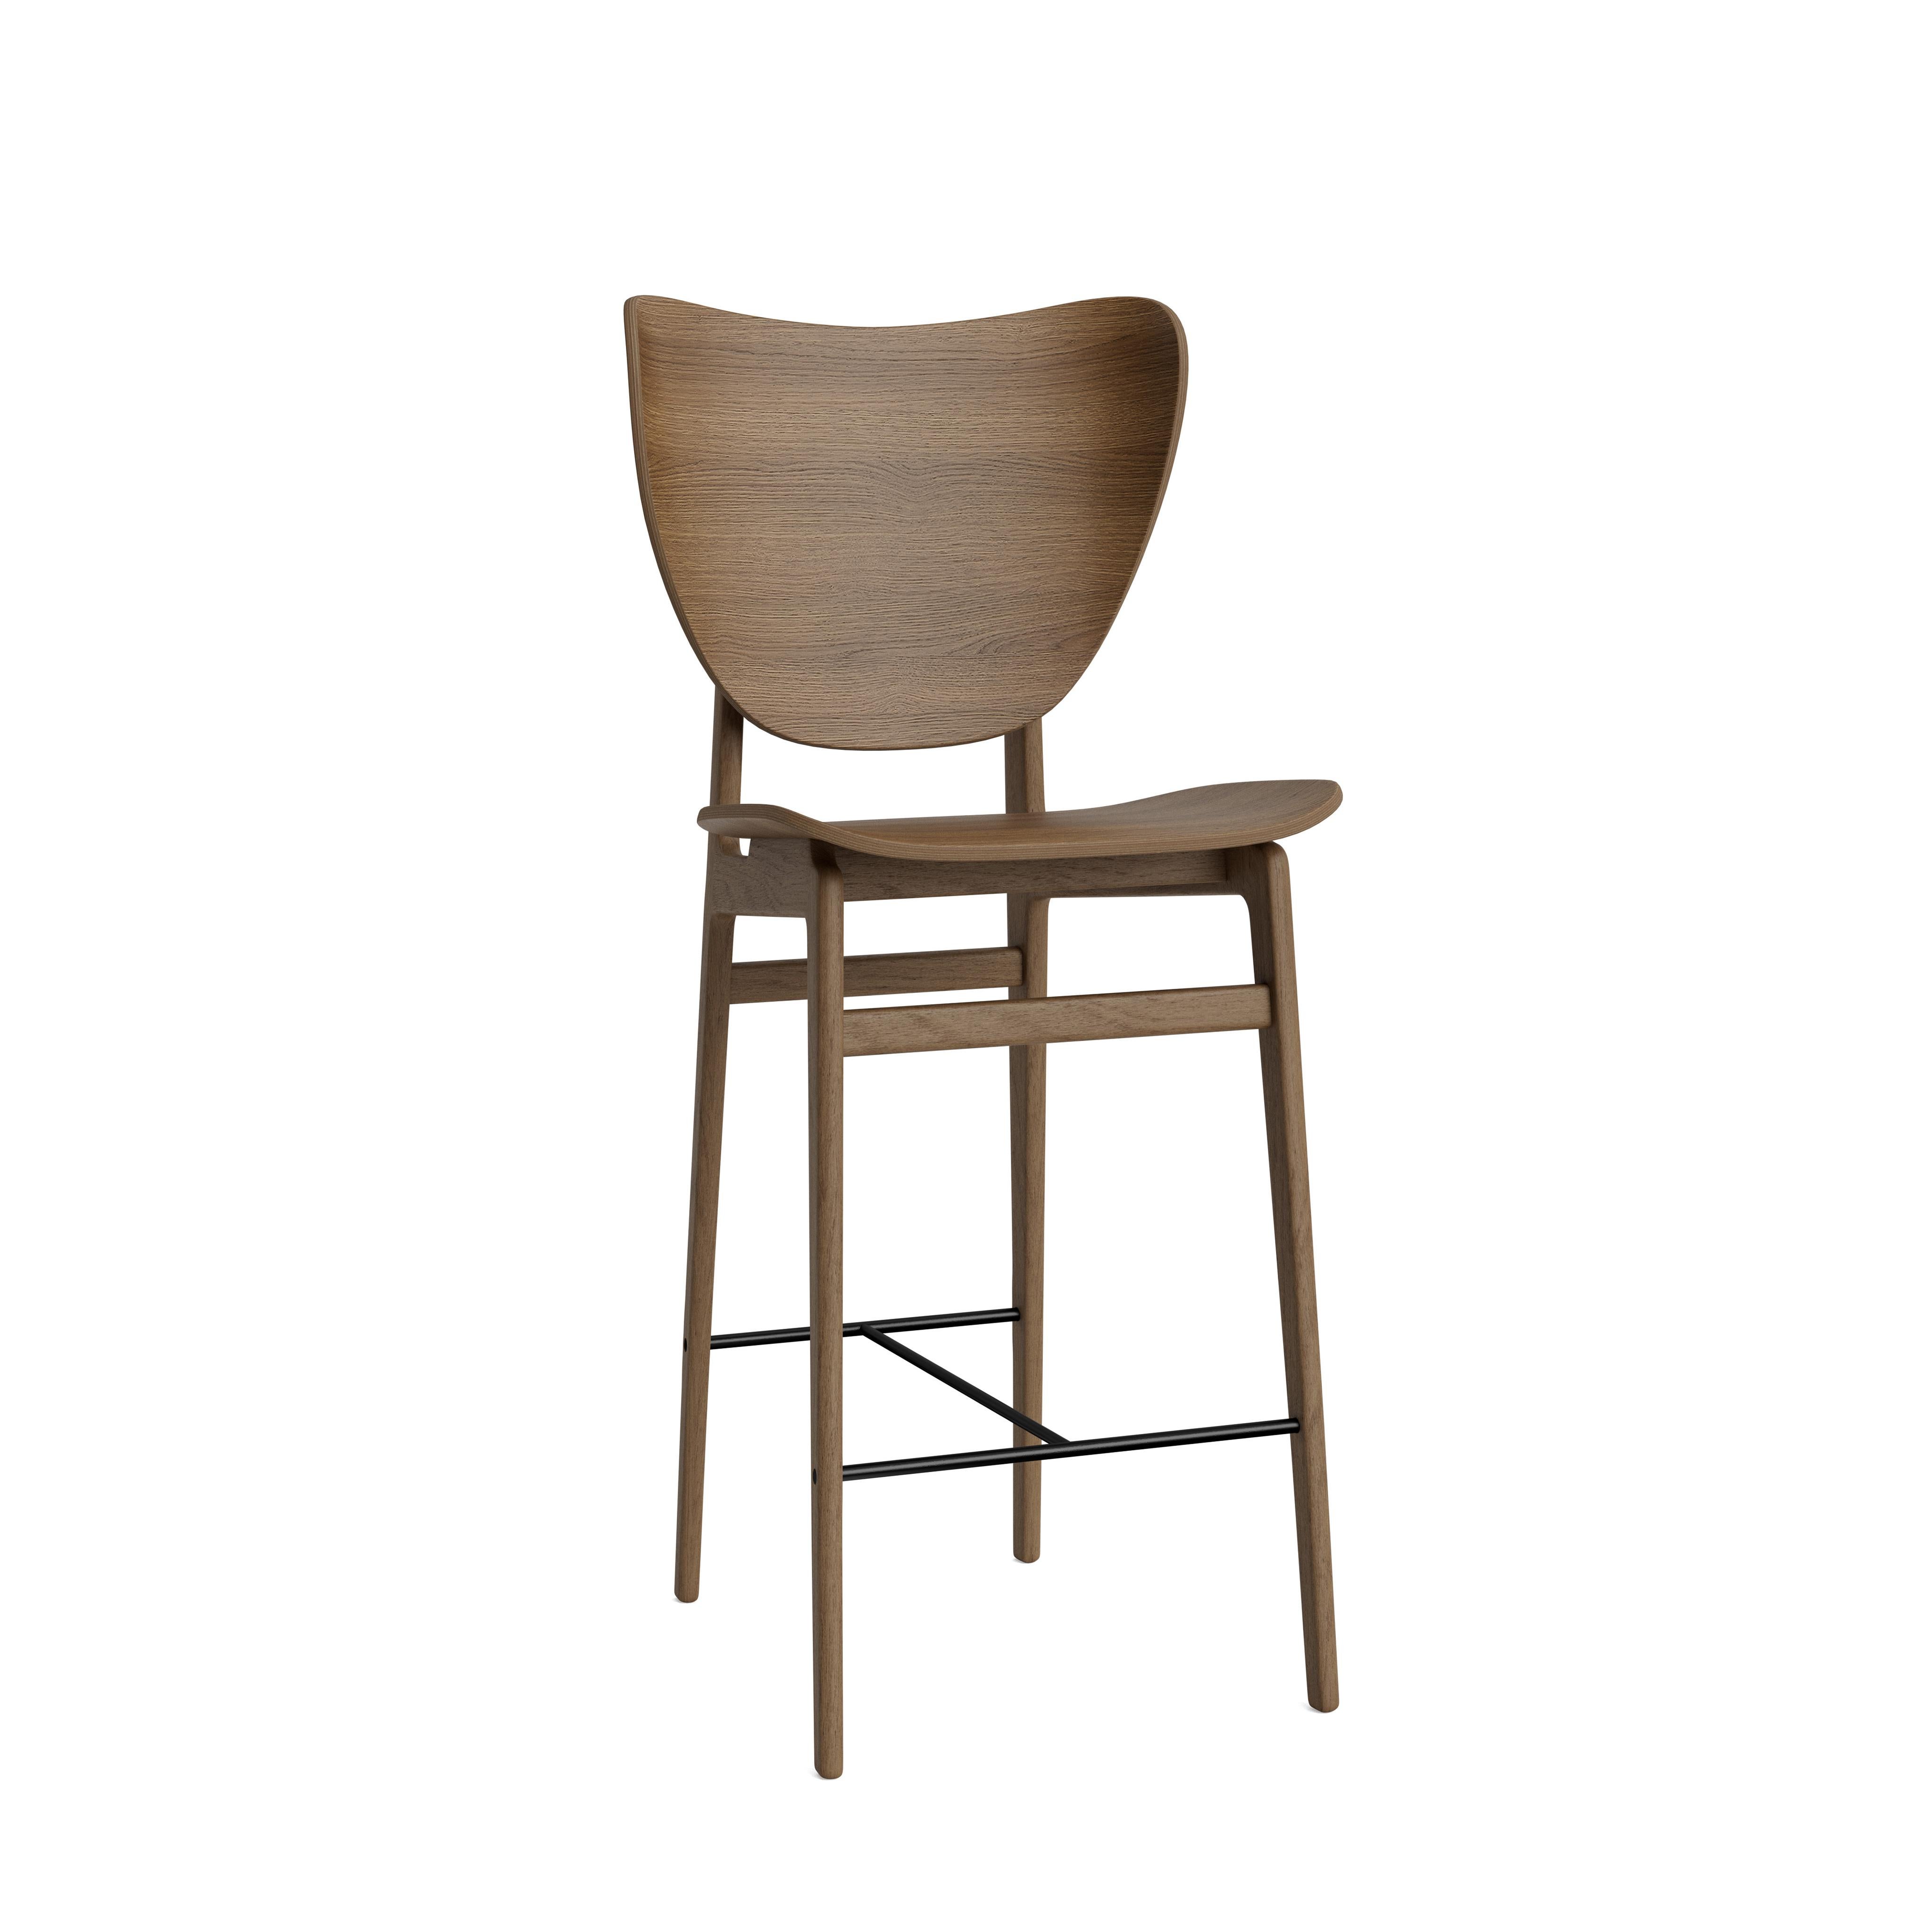 Elephant Bar Chair
Signed by Rune Krøjgaard & Knut Bendik Humlevik for Norr11. 

Dimensions: H. 101 cm x W. 46 cm x 52 cm  SH. 65 cm

Model shown on the picture:
Wood: Light Smoked oak

Wood types available: natural oak / light smoked oak / dark